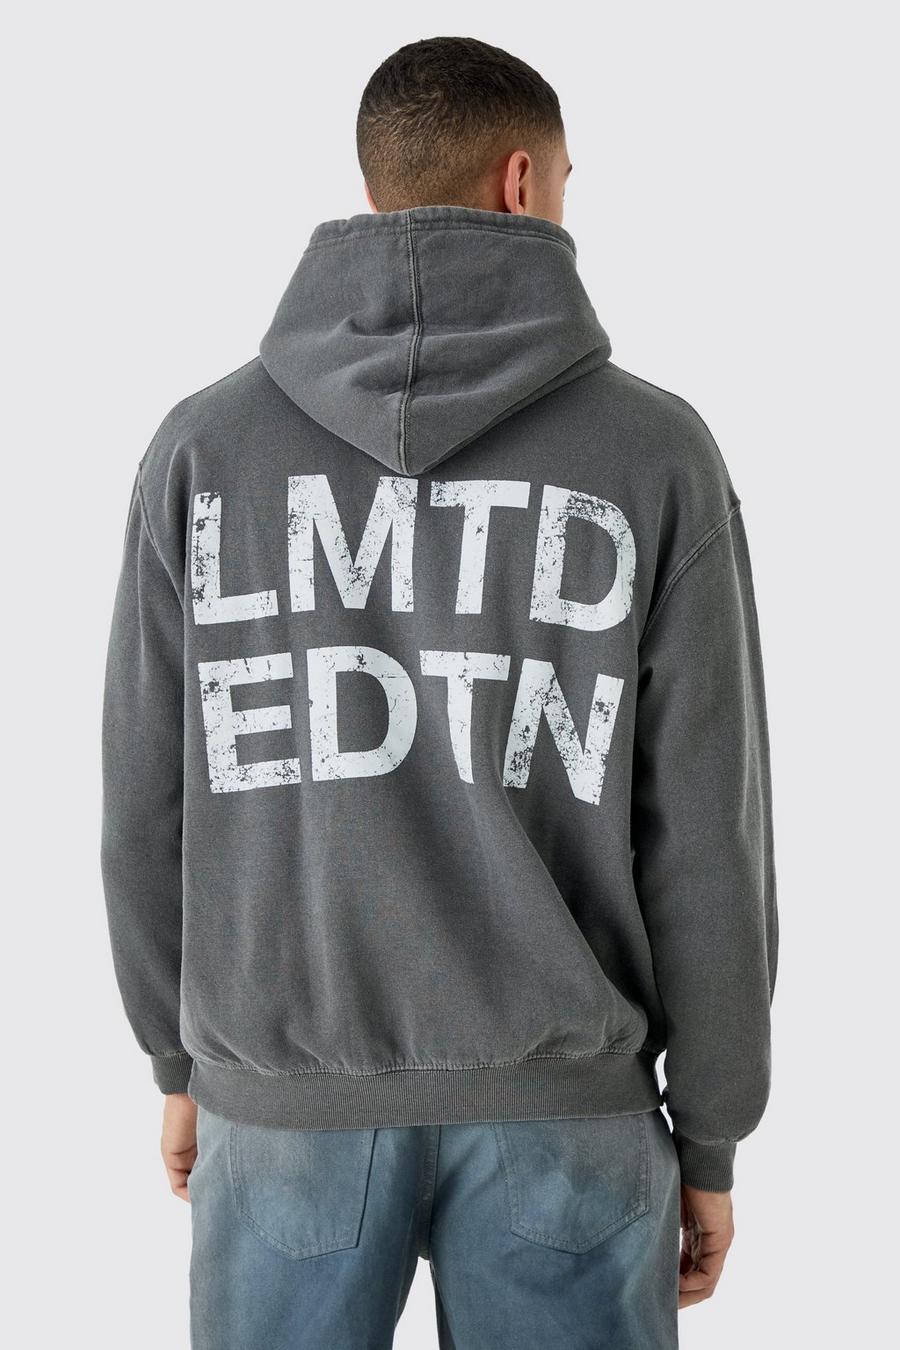 Charcoal Oversized Overdyed Lmtd Graphic Hoodie